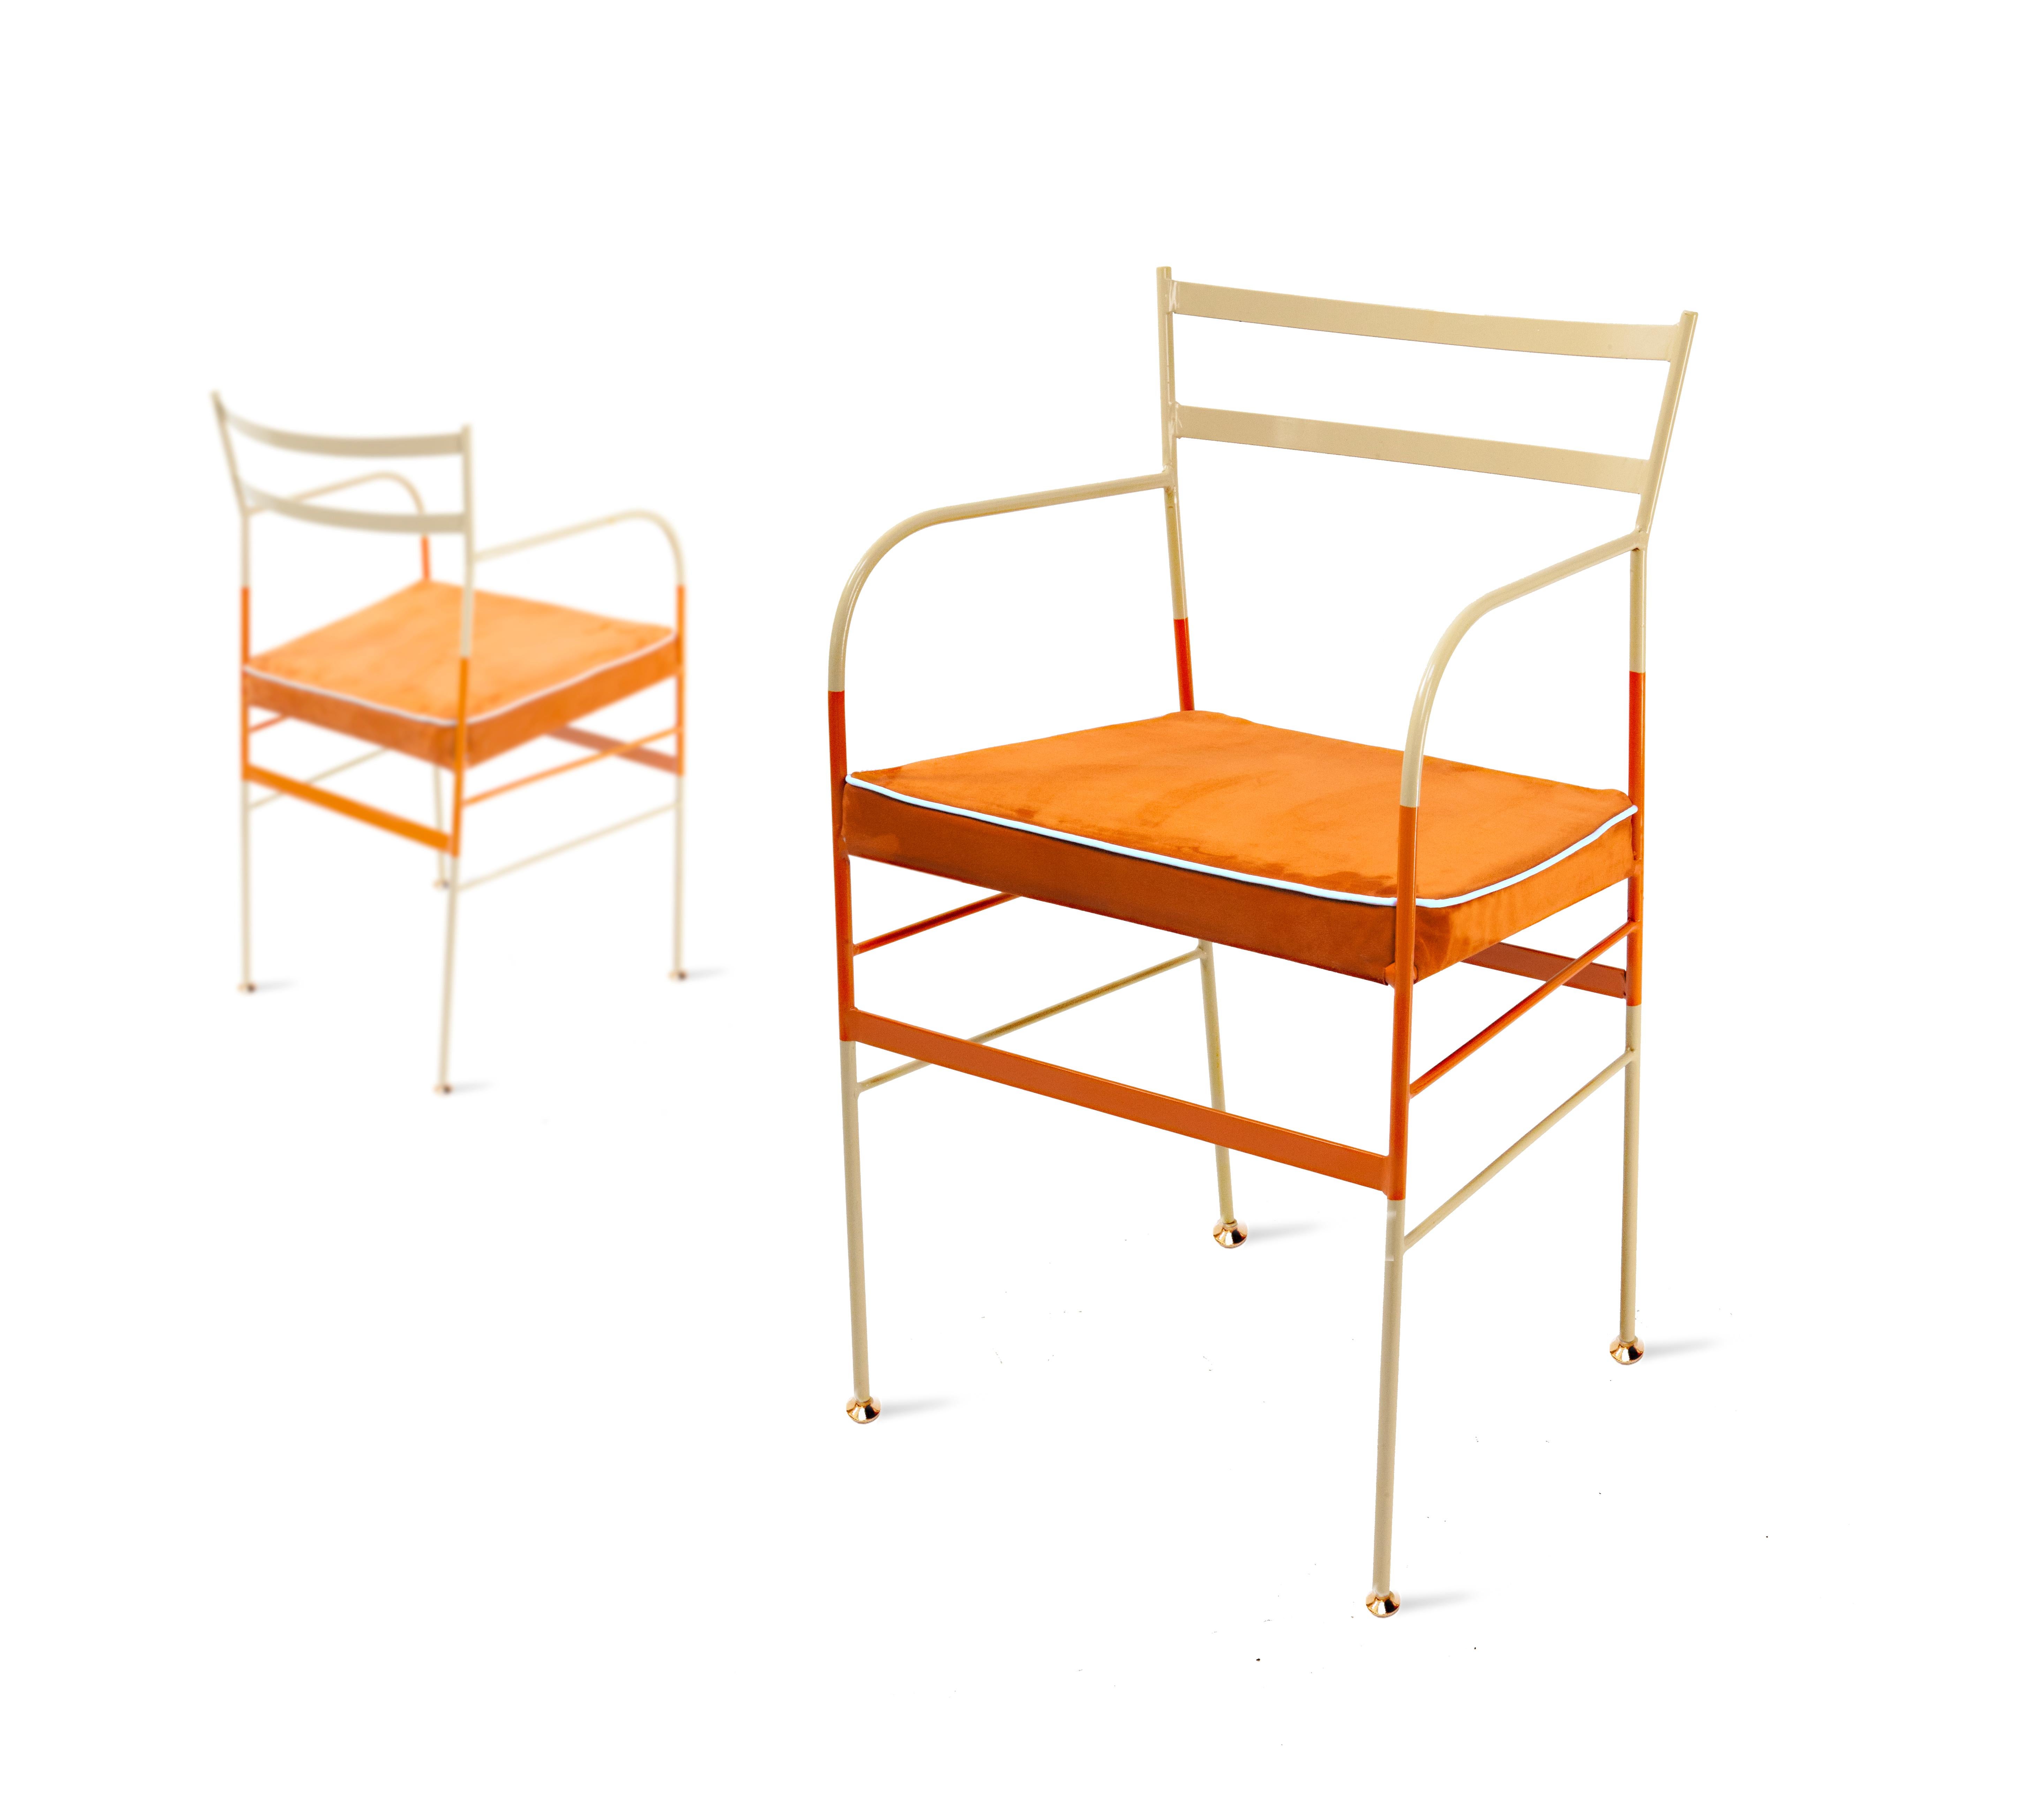 Suede piping on contrasting bright tones produces a neo-retro quality, finished with a uniquely organic compound paint and polish to prevent rust. Handcrafted in Italy from high-strength iron, these garden chairs by Sotow boast practicality and